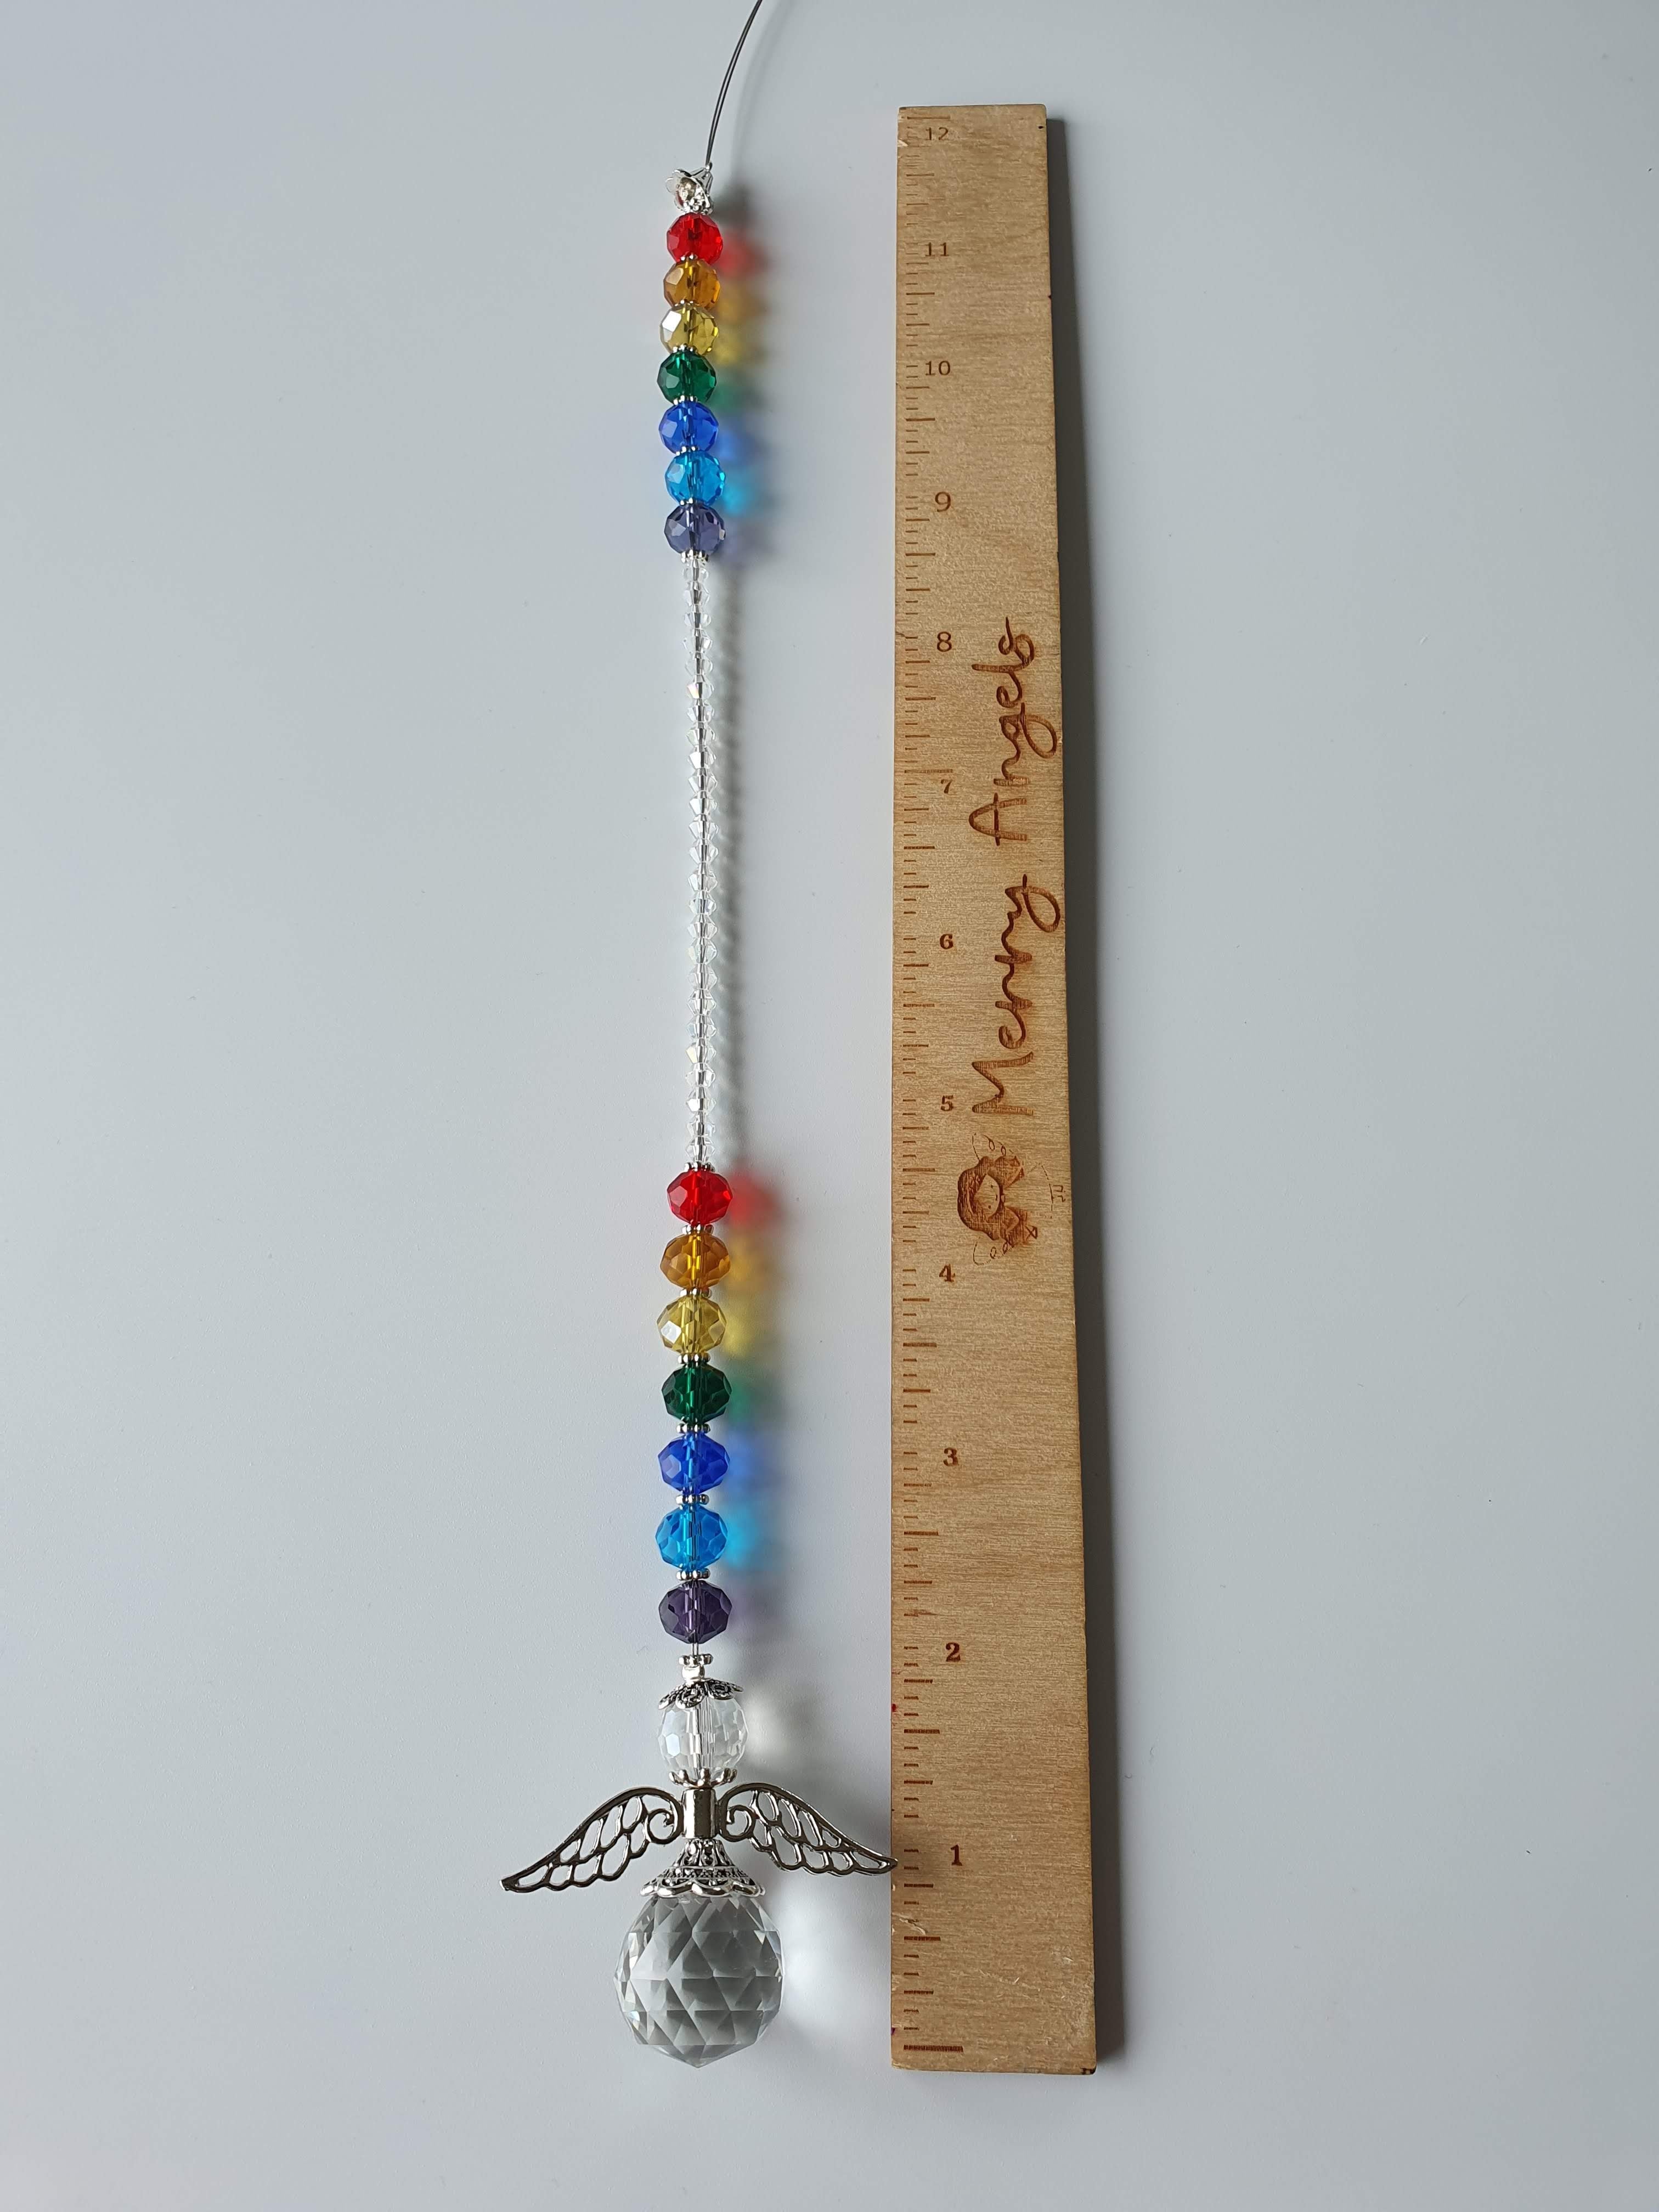 This is a picture of an angel rainbow 10.5 inch suncatcher laid out beside a ruler